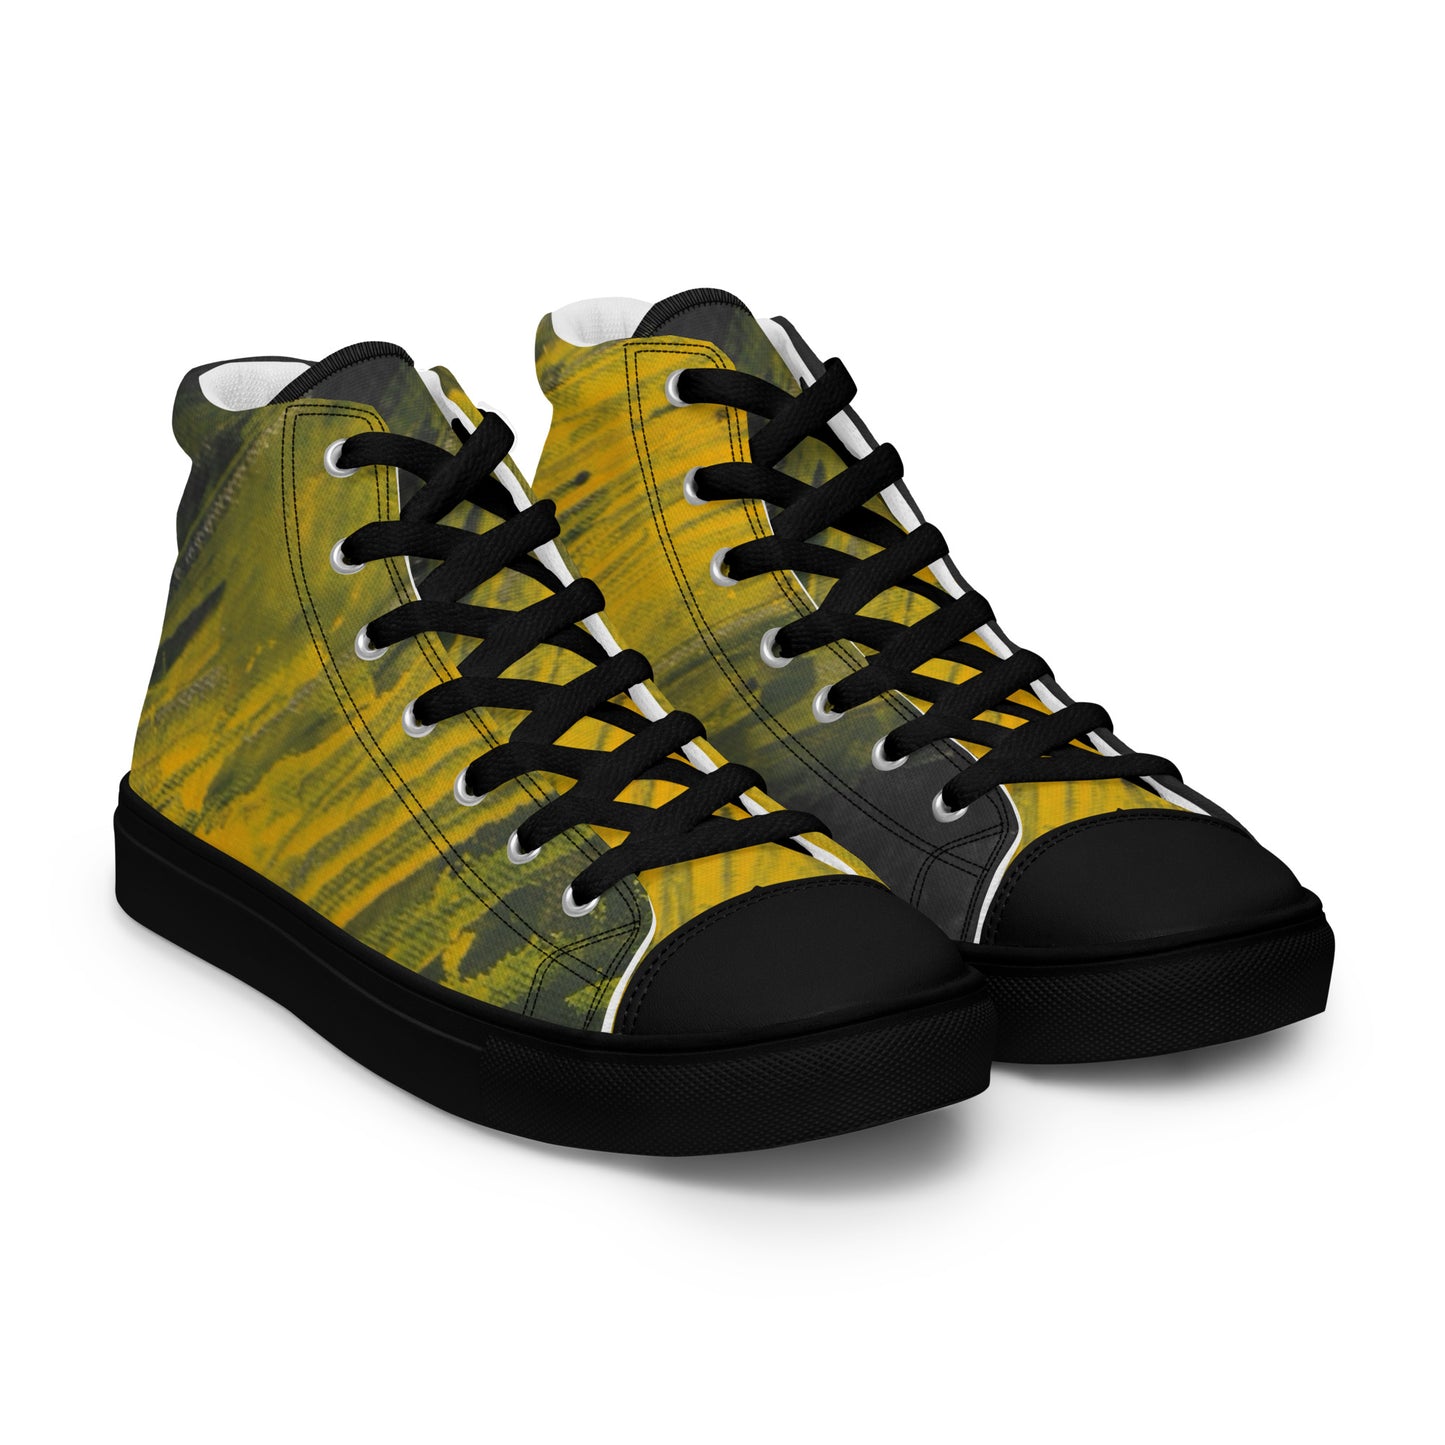 Speed Men’s high top canvas shoes